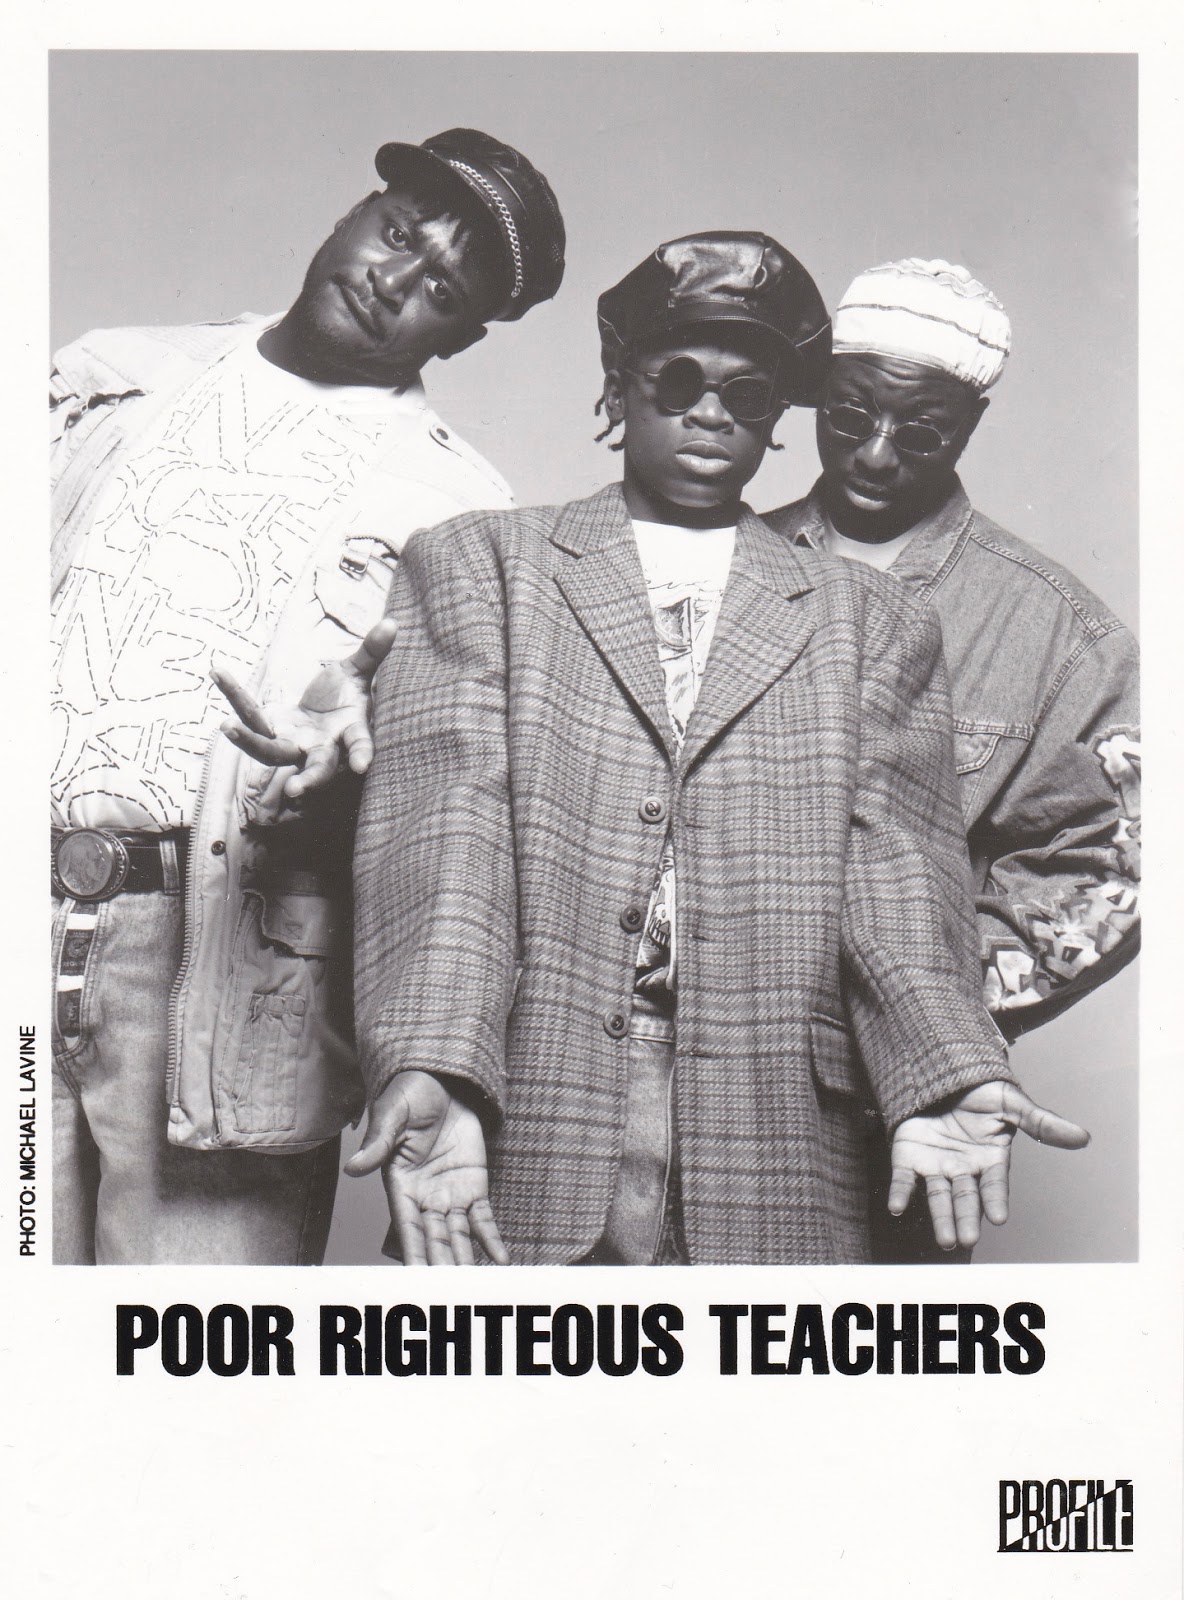 Gensu Dean & Wise Intelligent (Poor Righteous Teachers) - G.o.D. (Game of  Death) [Music Video)